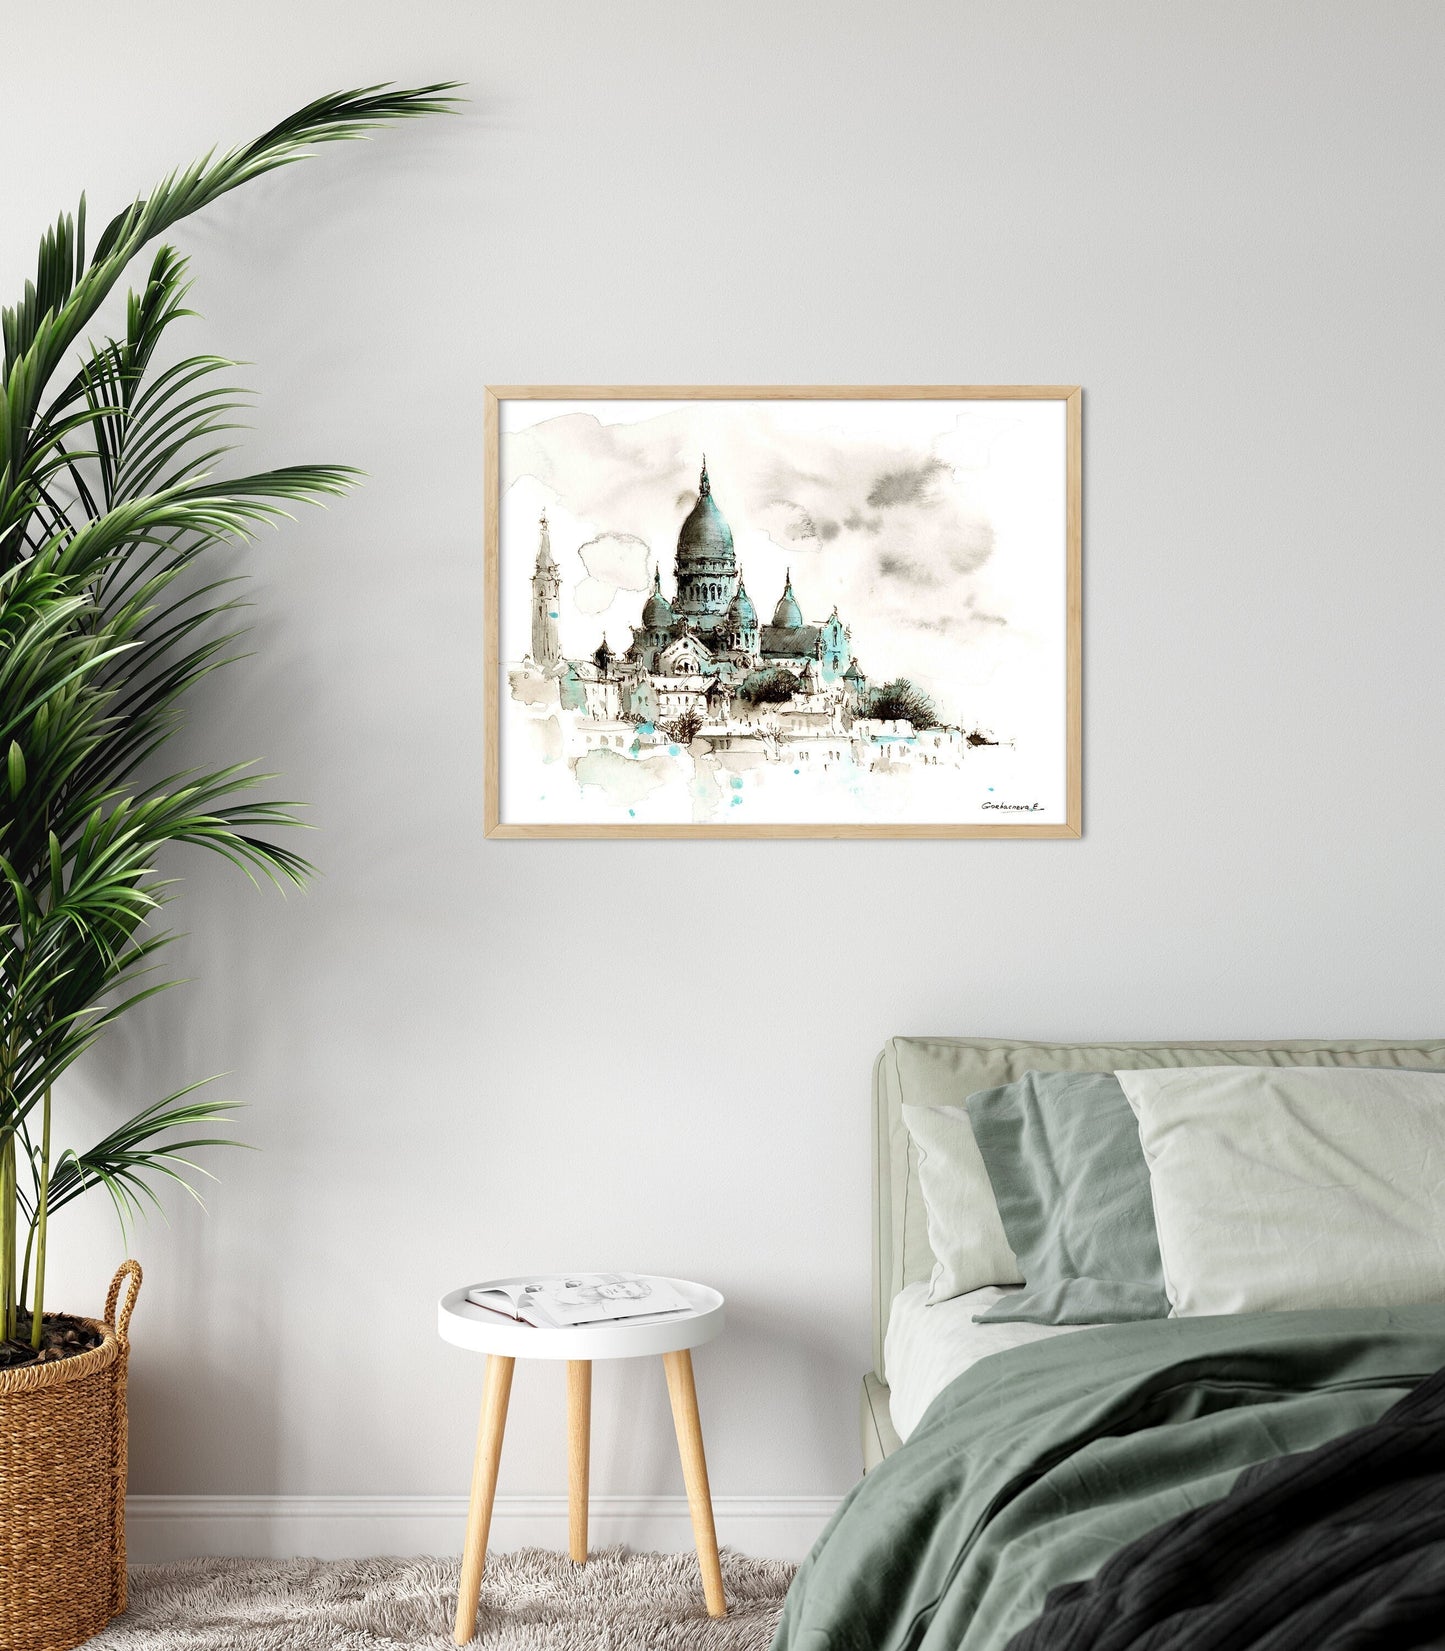 Paris Wall Art, Europe Art Print, French Architecture, Basilica Sacre Coeur, Watercolor Sketch Painting, Travel Gift For Women